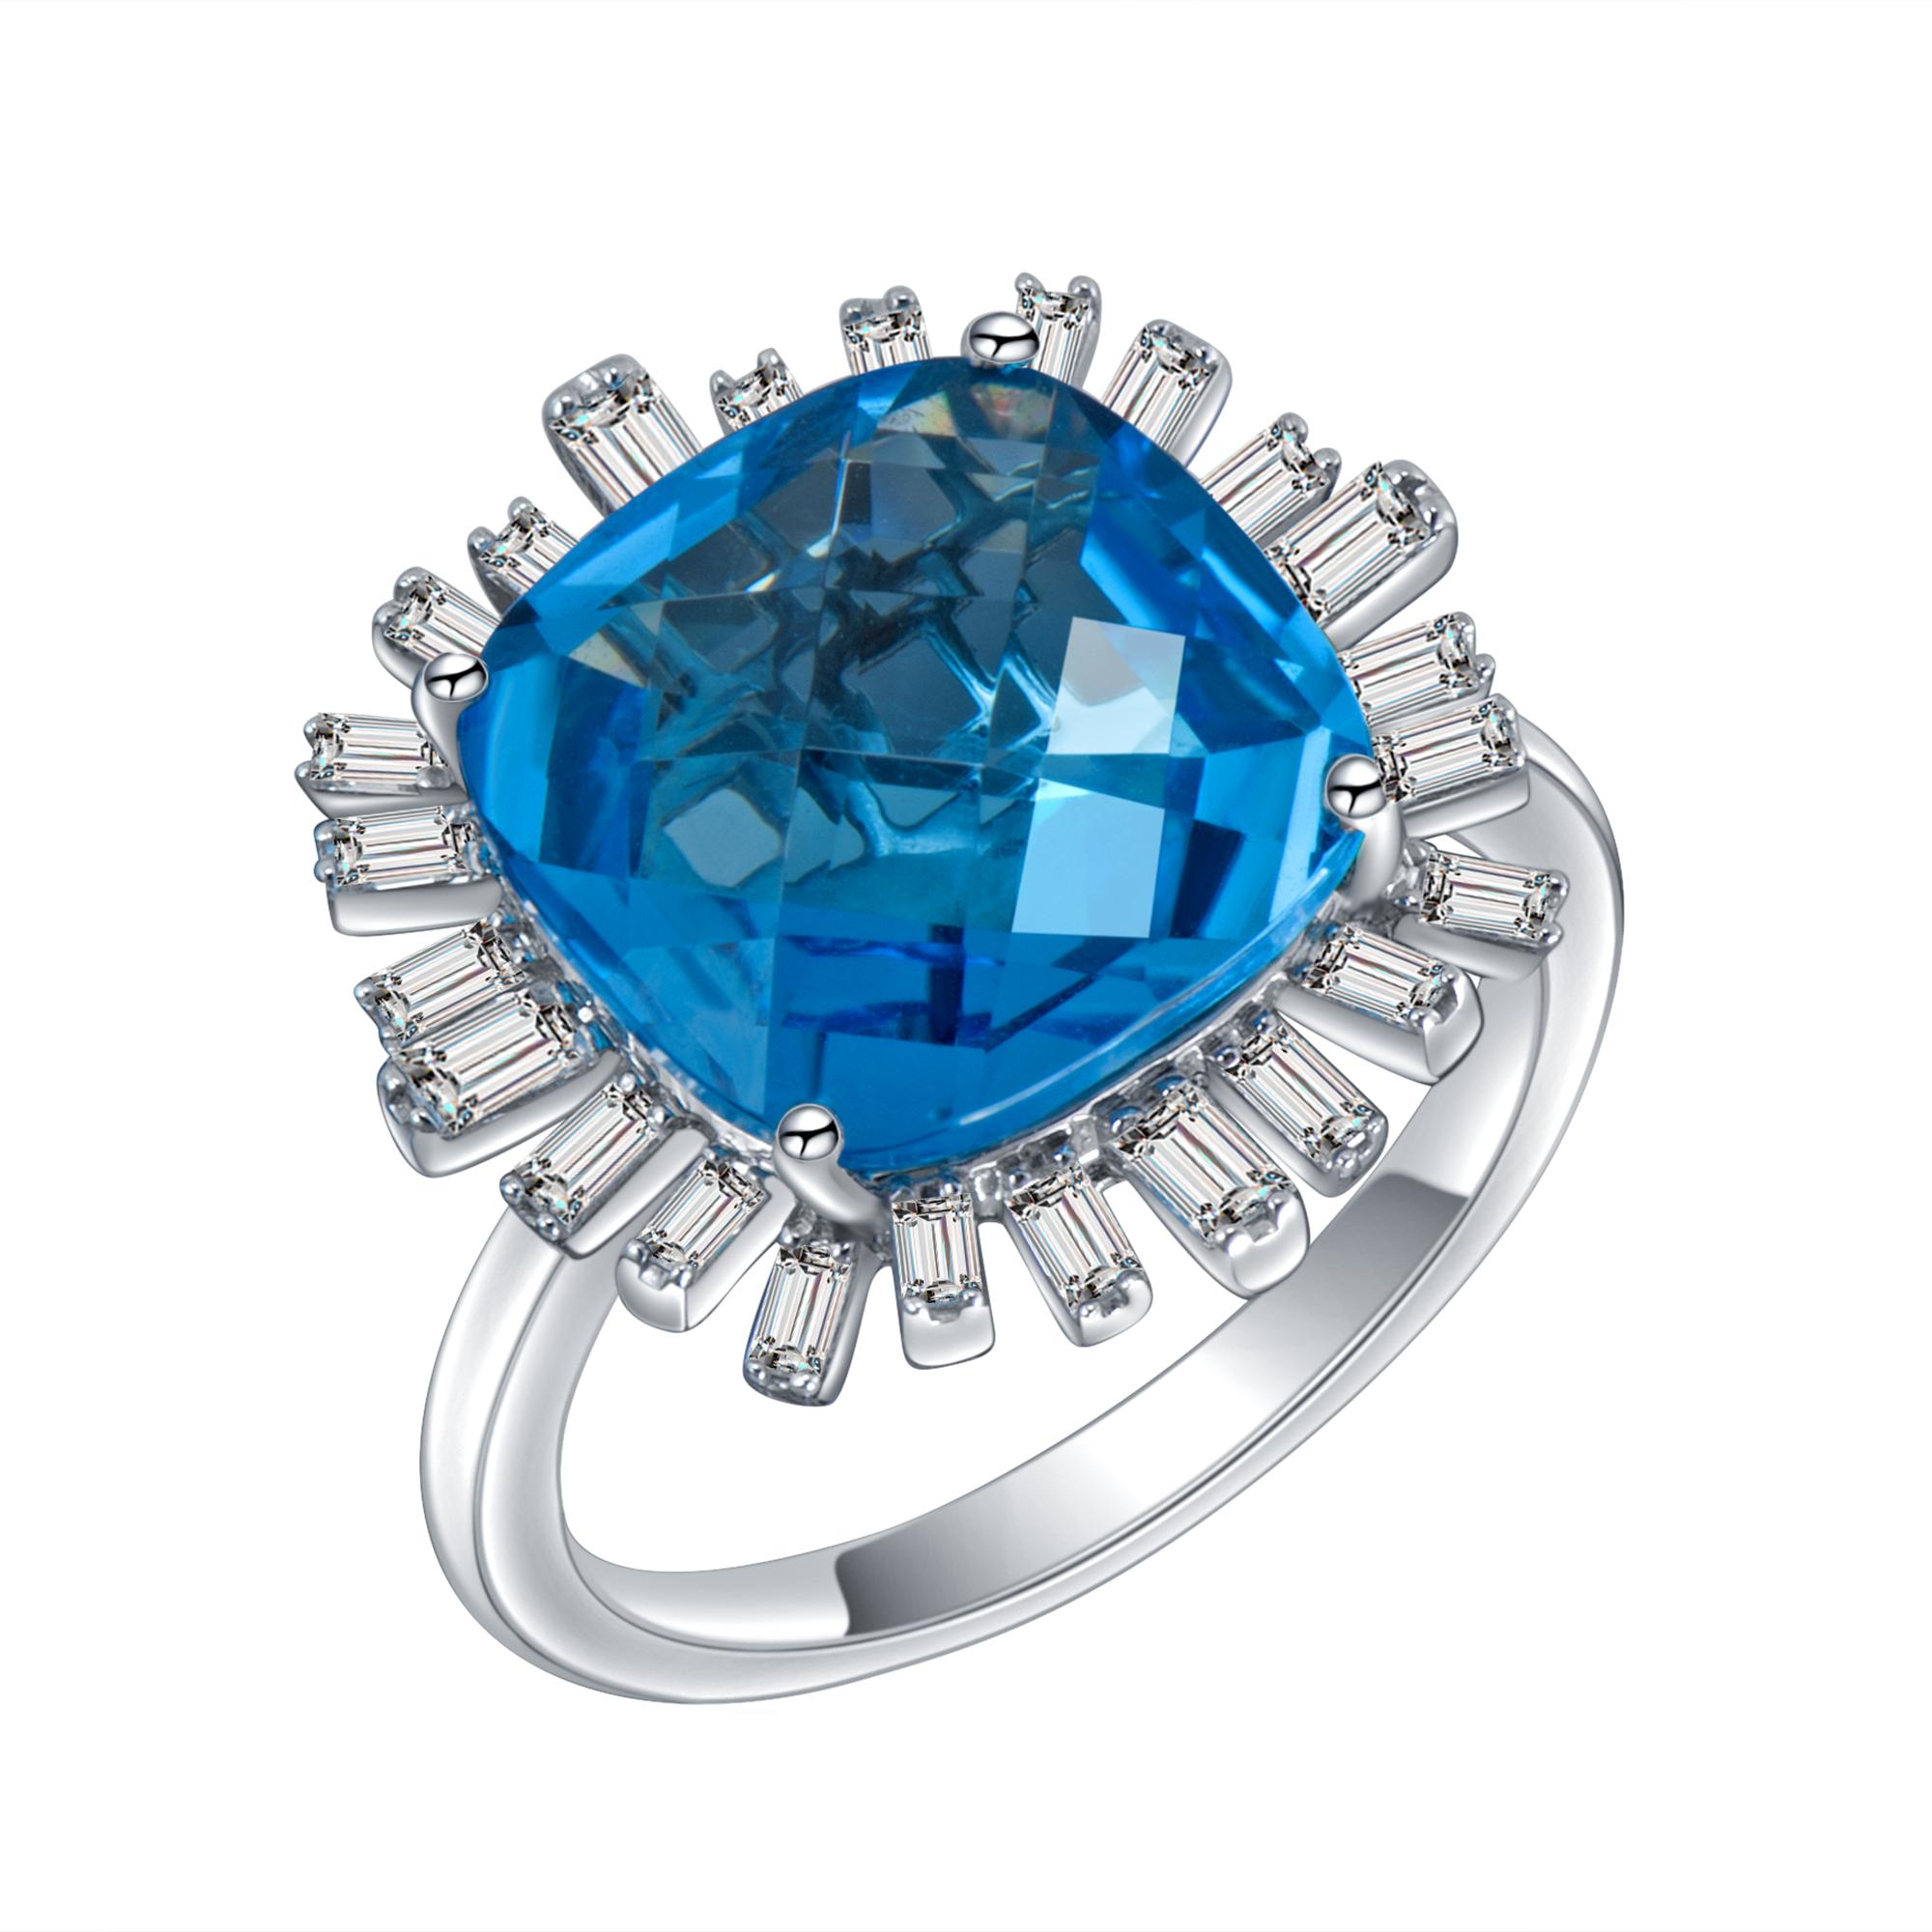 18K Gold Cocktail Ring with Baguette cut Diamonds and Blue Topaz Romance Ring, choose between 18K White Gold or 18K Rose Gold.
Gold Weight: 4.92
Diamonds Carats: 0.60
Diamonds Color: G
Diamonds Clarity: VS
Style: HJROMBTRWG
Available in size 7 and